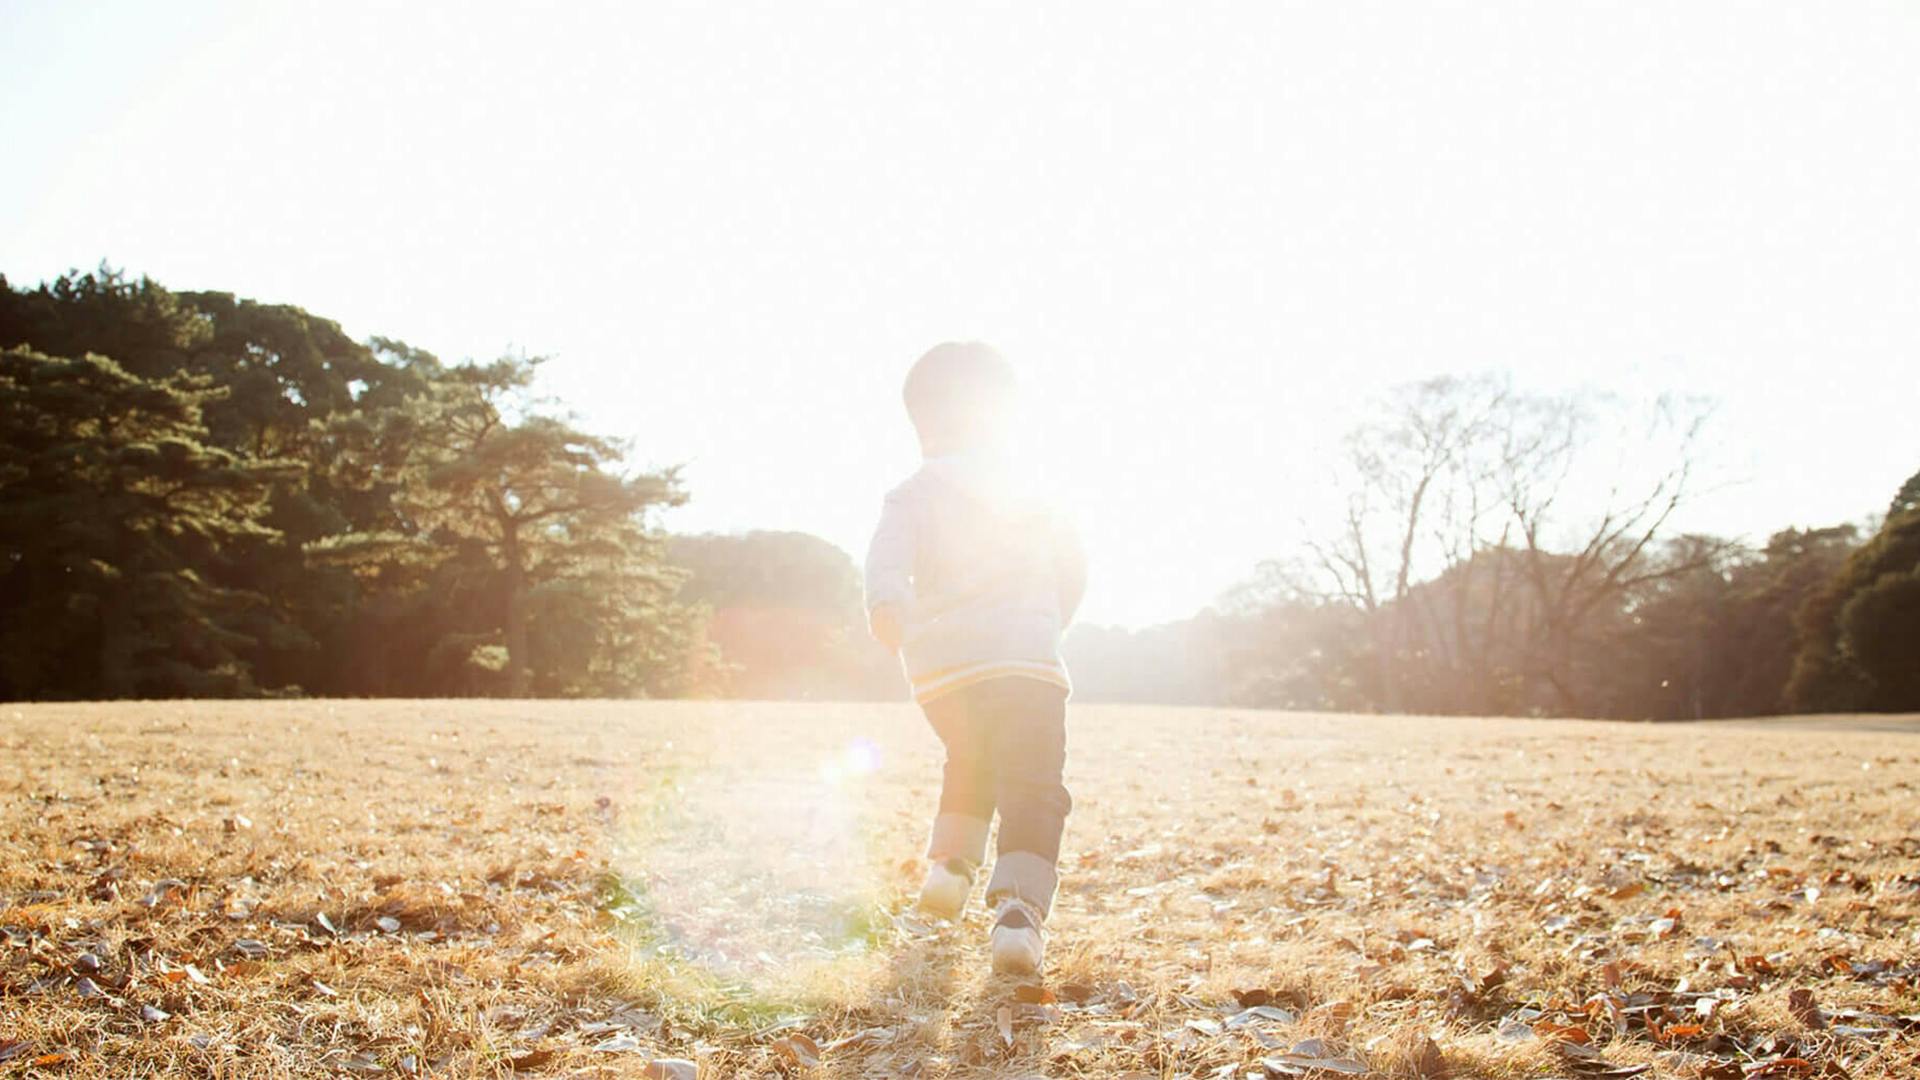 A silhouette of a child lit with white light running through a field outside